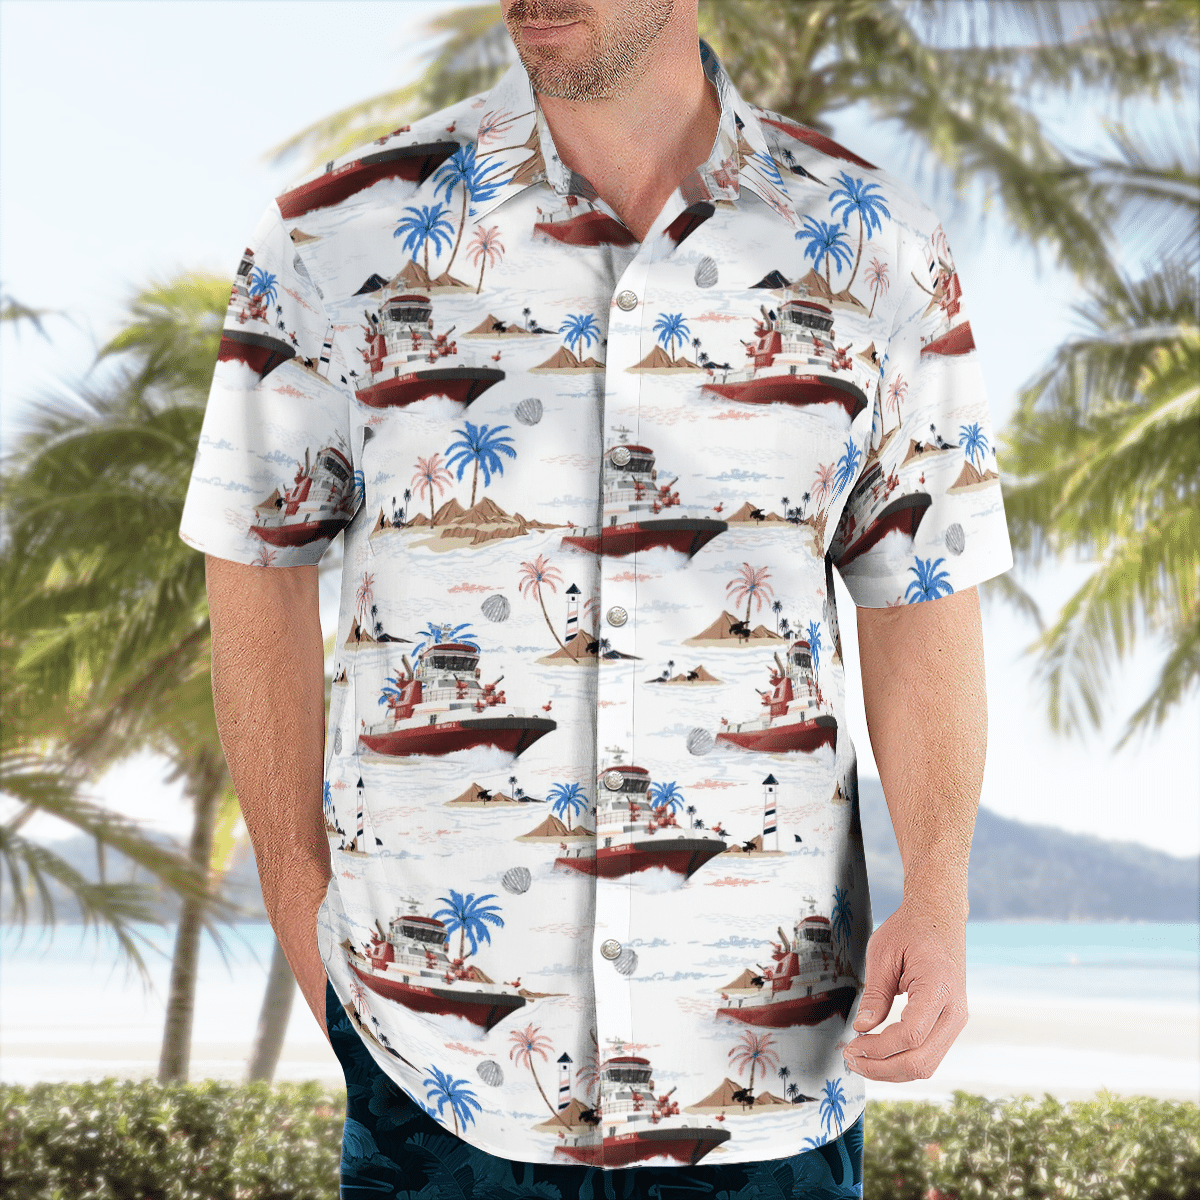 There are several styles of beach and Hawaiian shorts and tops to choose from 189